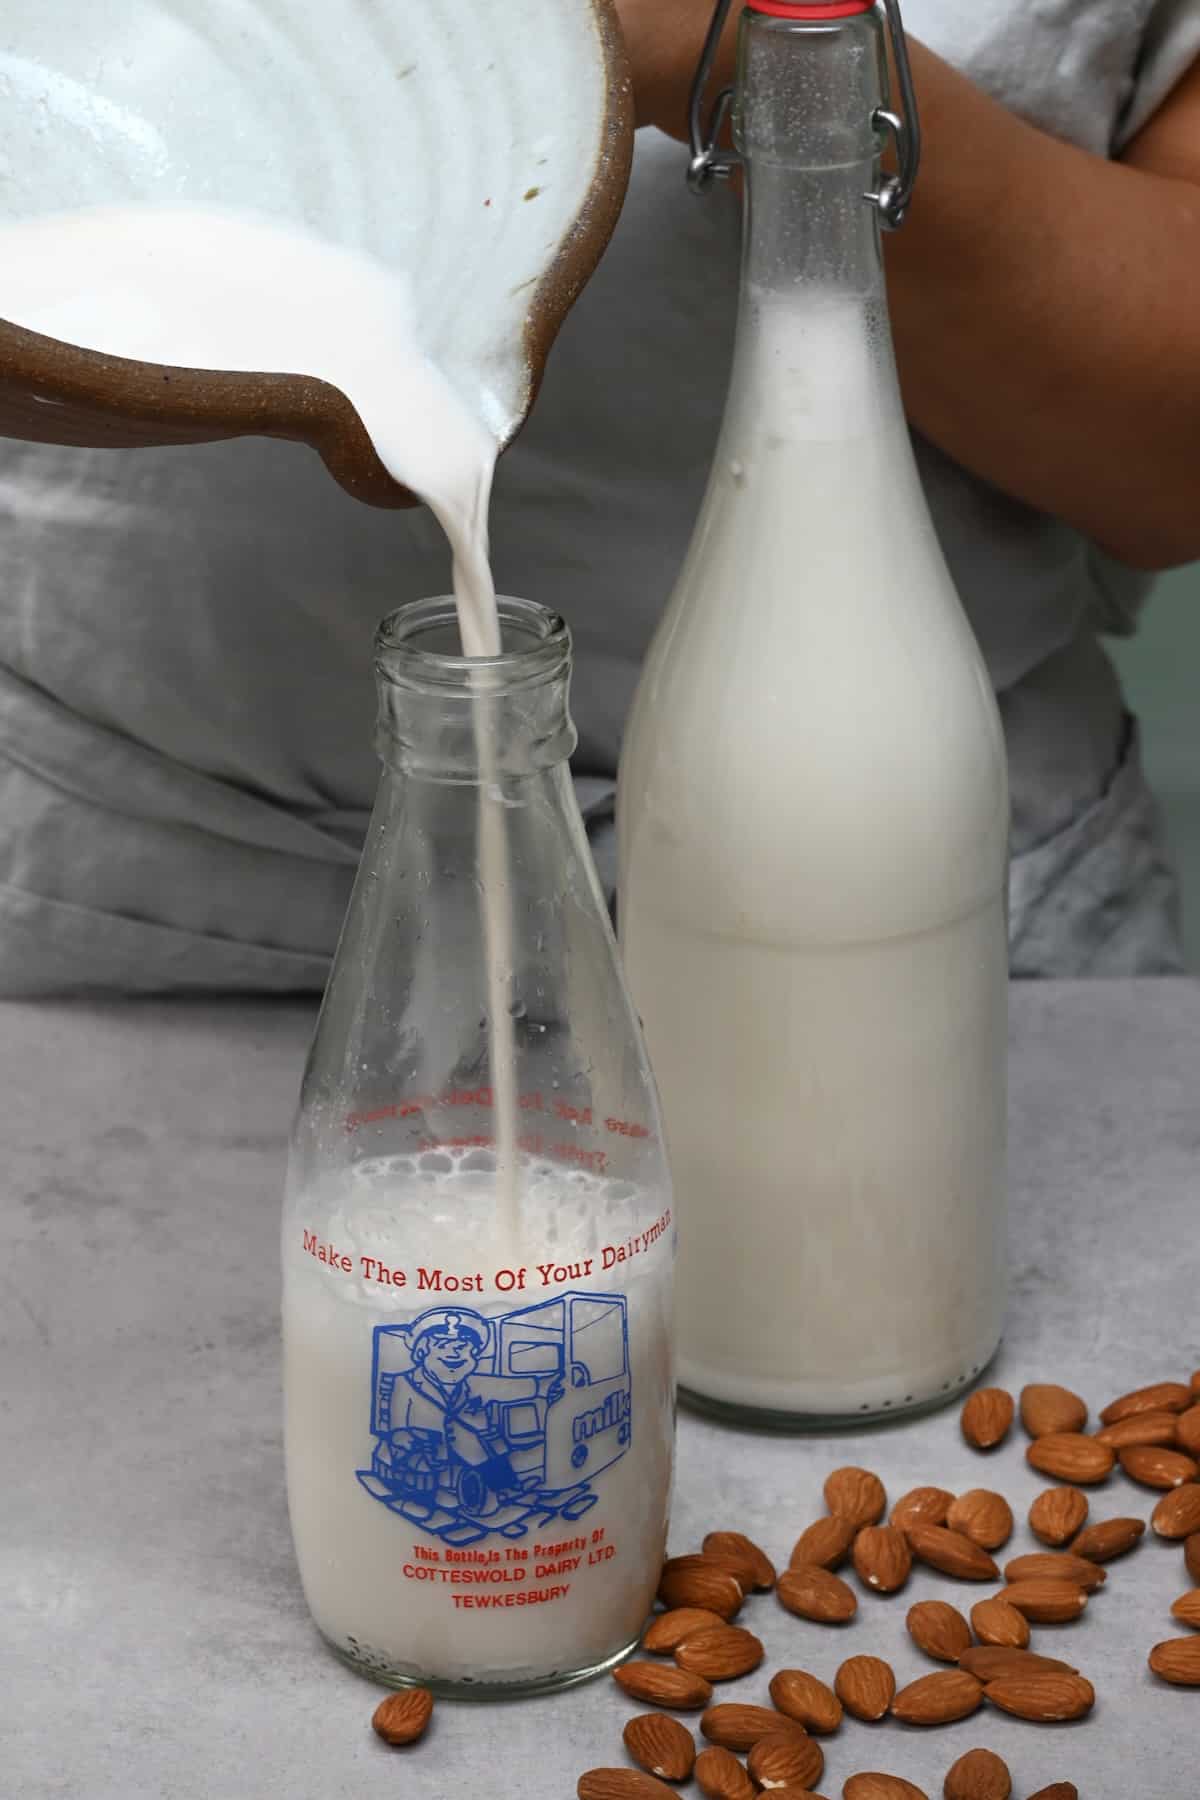 Pouring homemade almond milk in a bottle